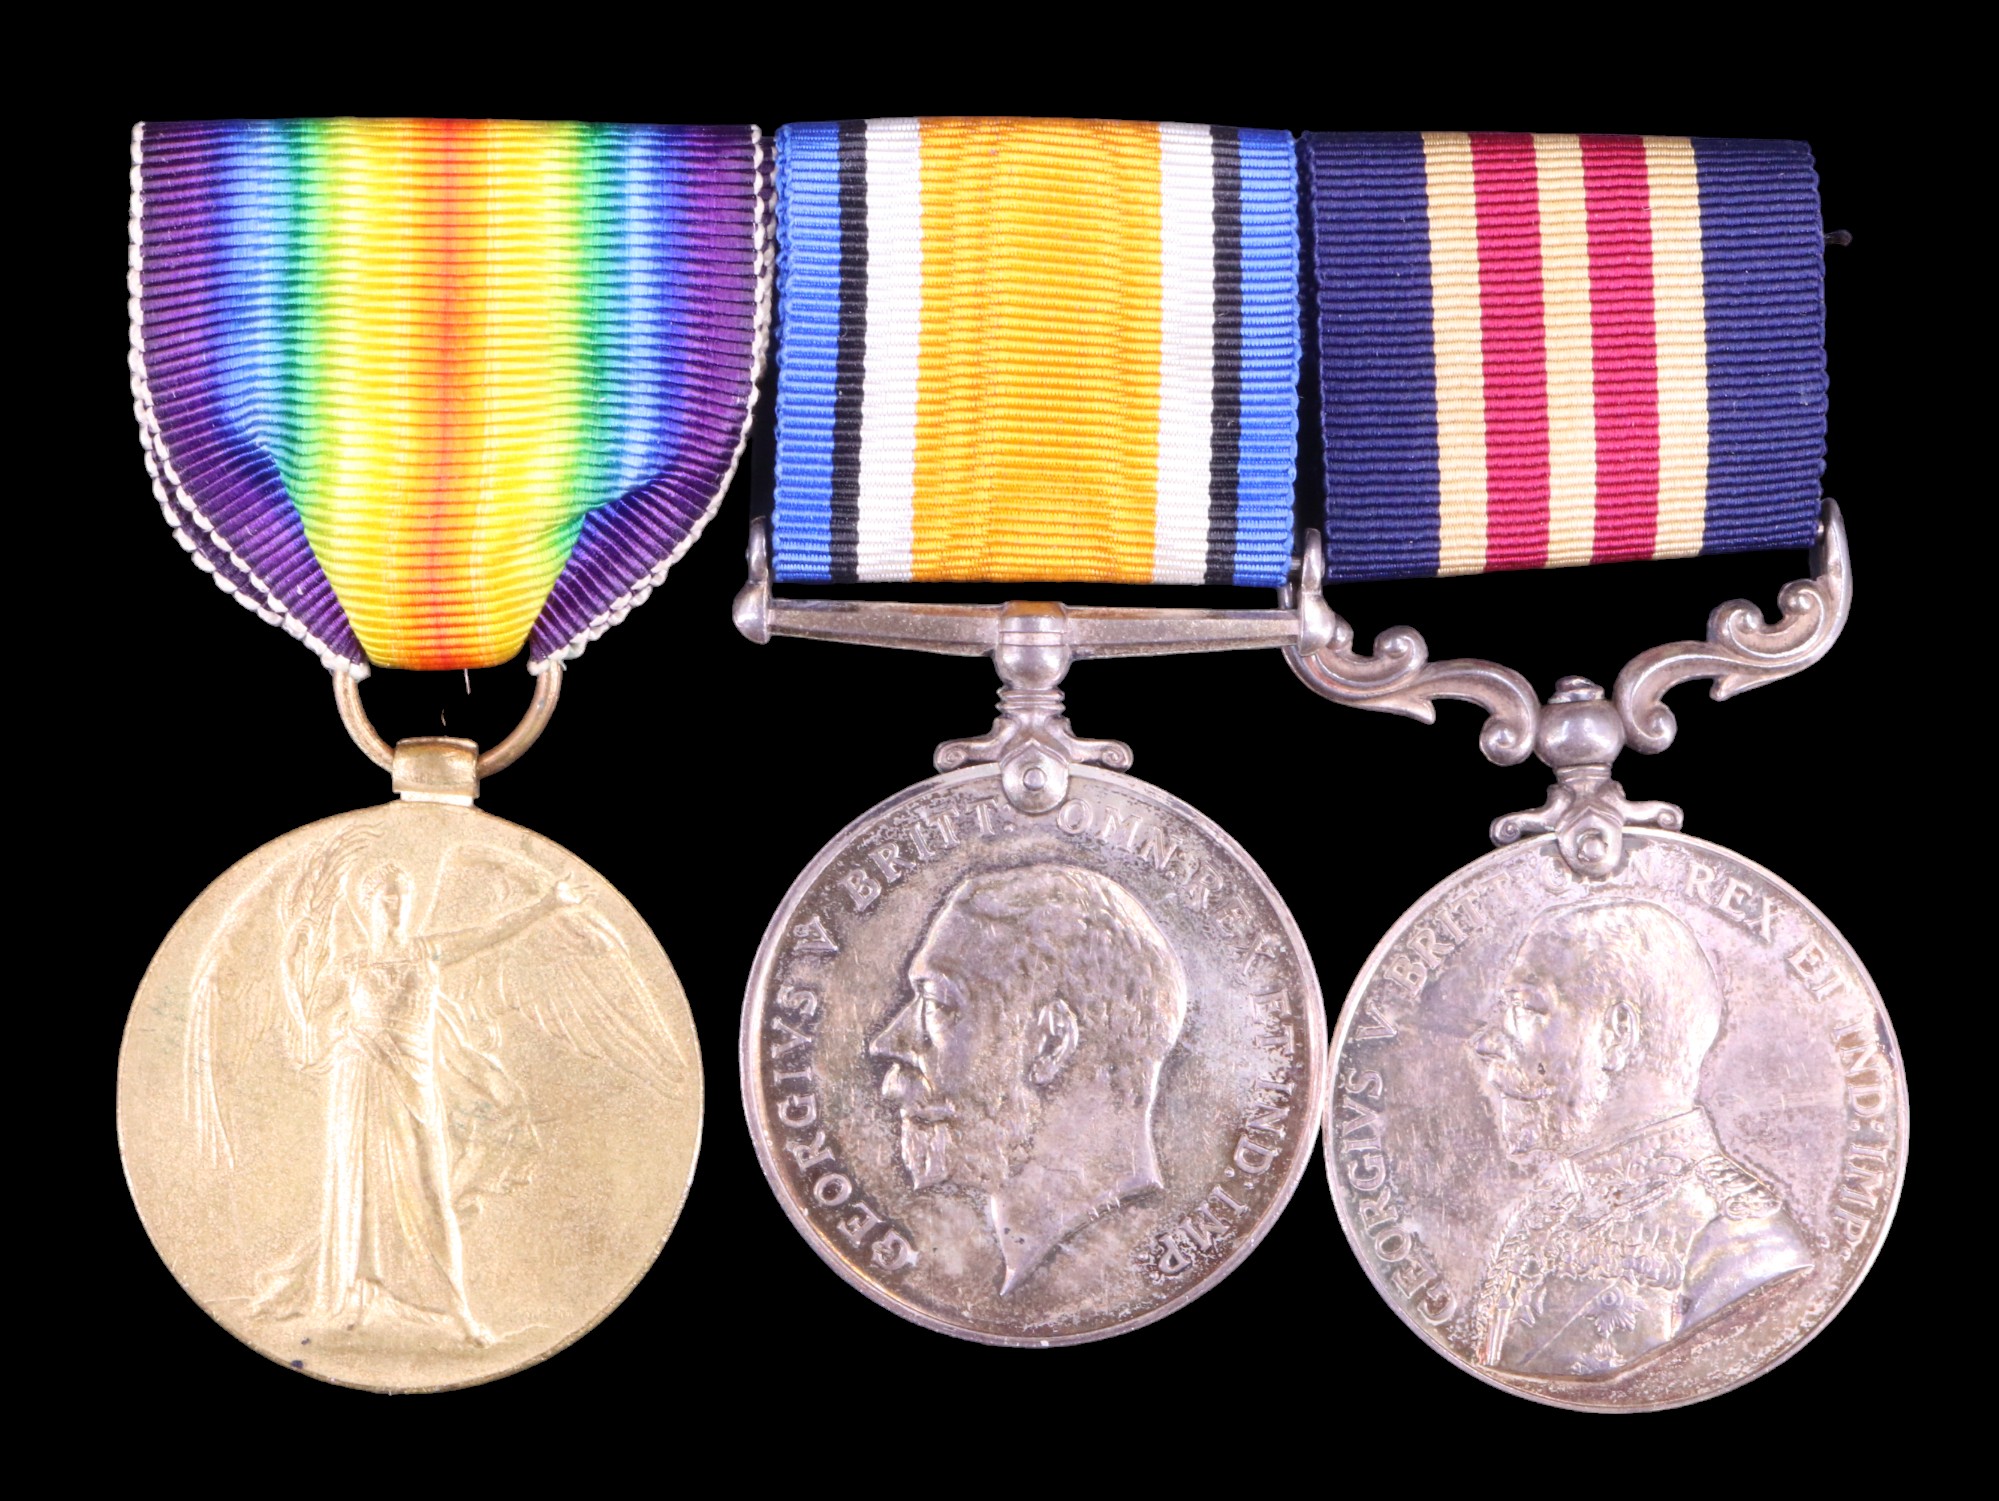 A Military Medal with British War and Victory Medals to DM2-206580 Pte Robert Armstrong, Army - Image 2 of 9